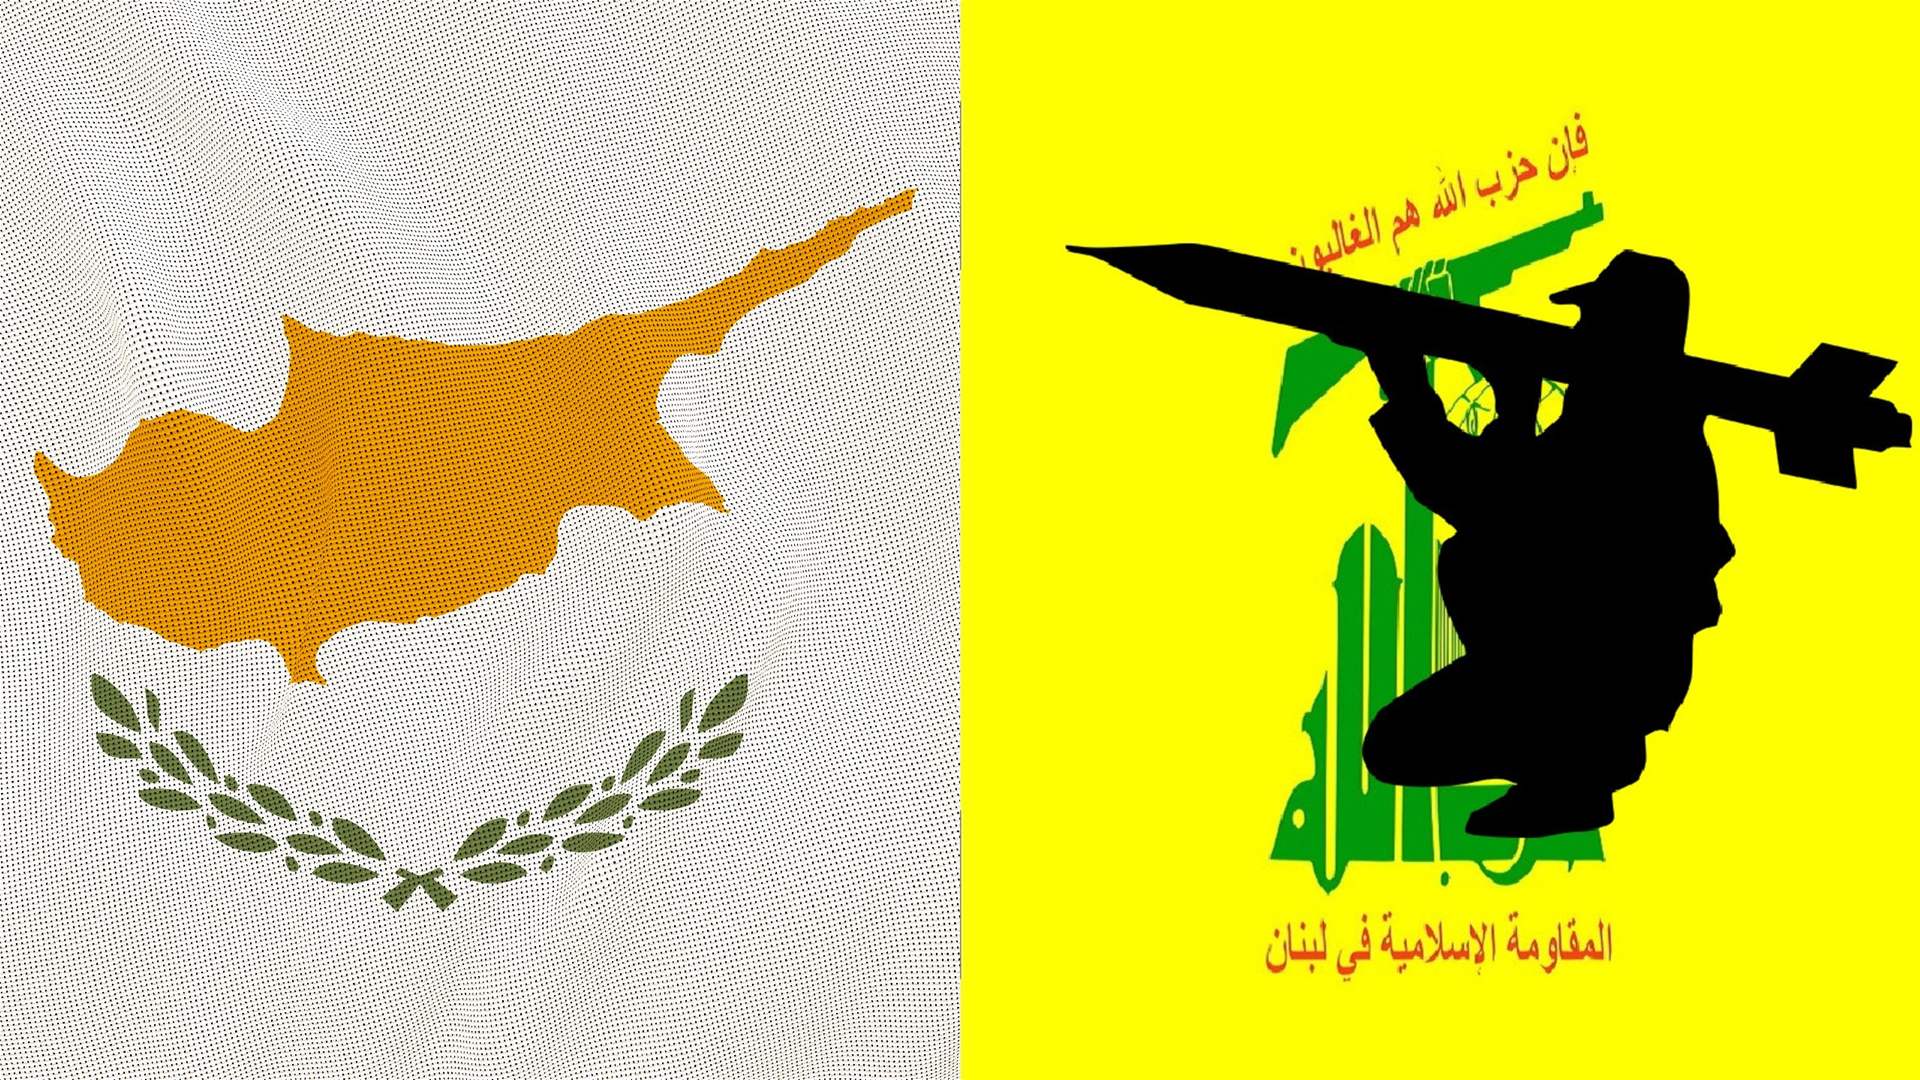 Threats to Cyprus against assisting Israel: Hezbollah&#39;s past with Cyprus